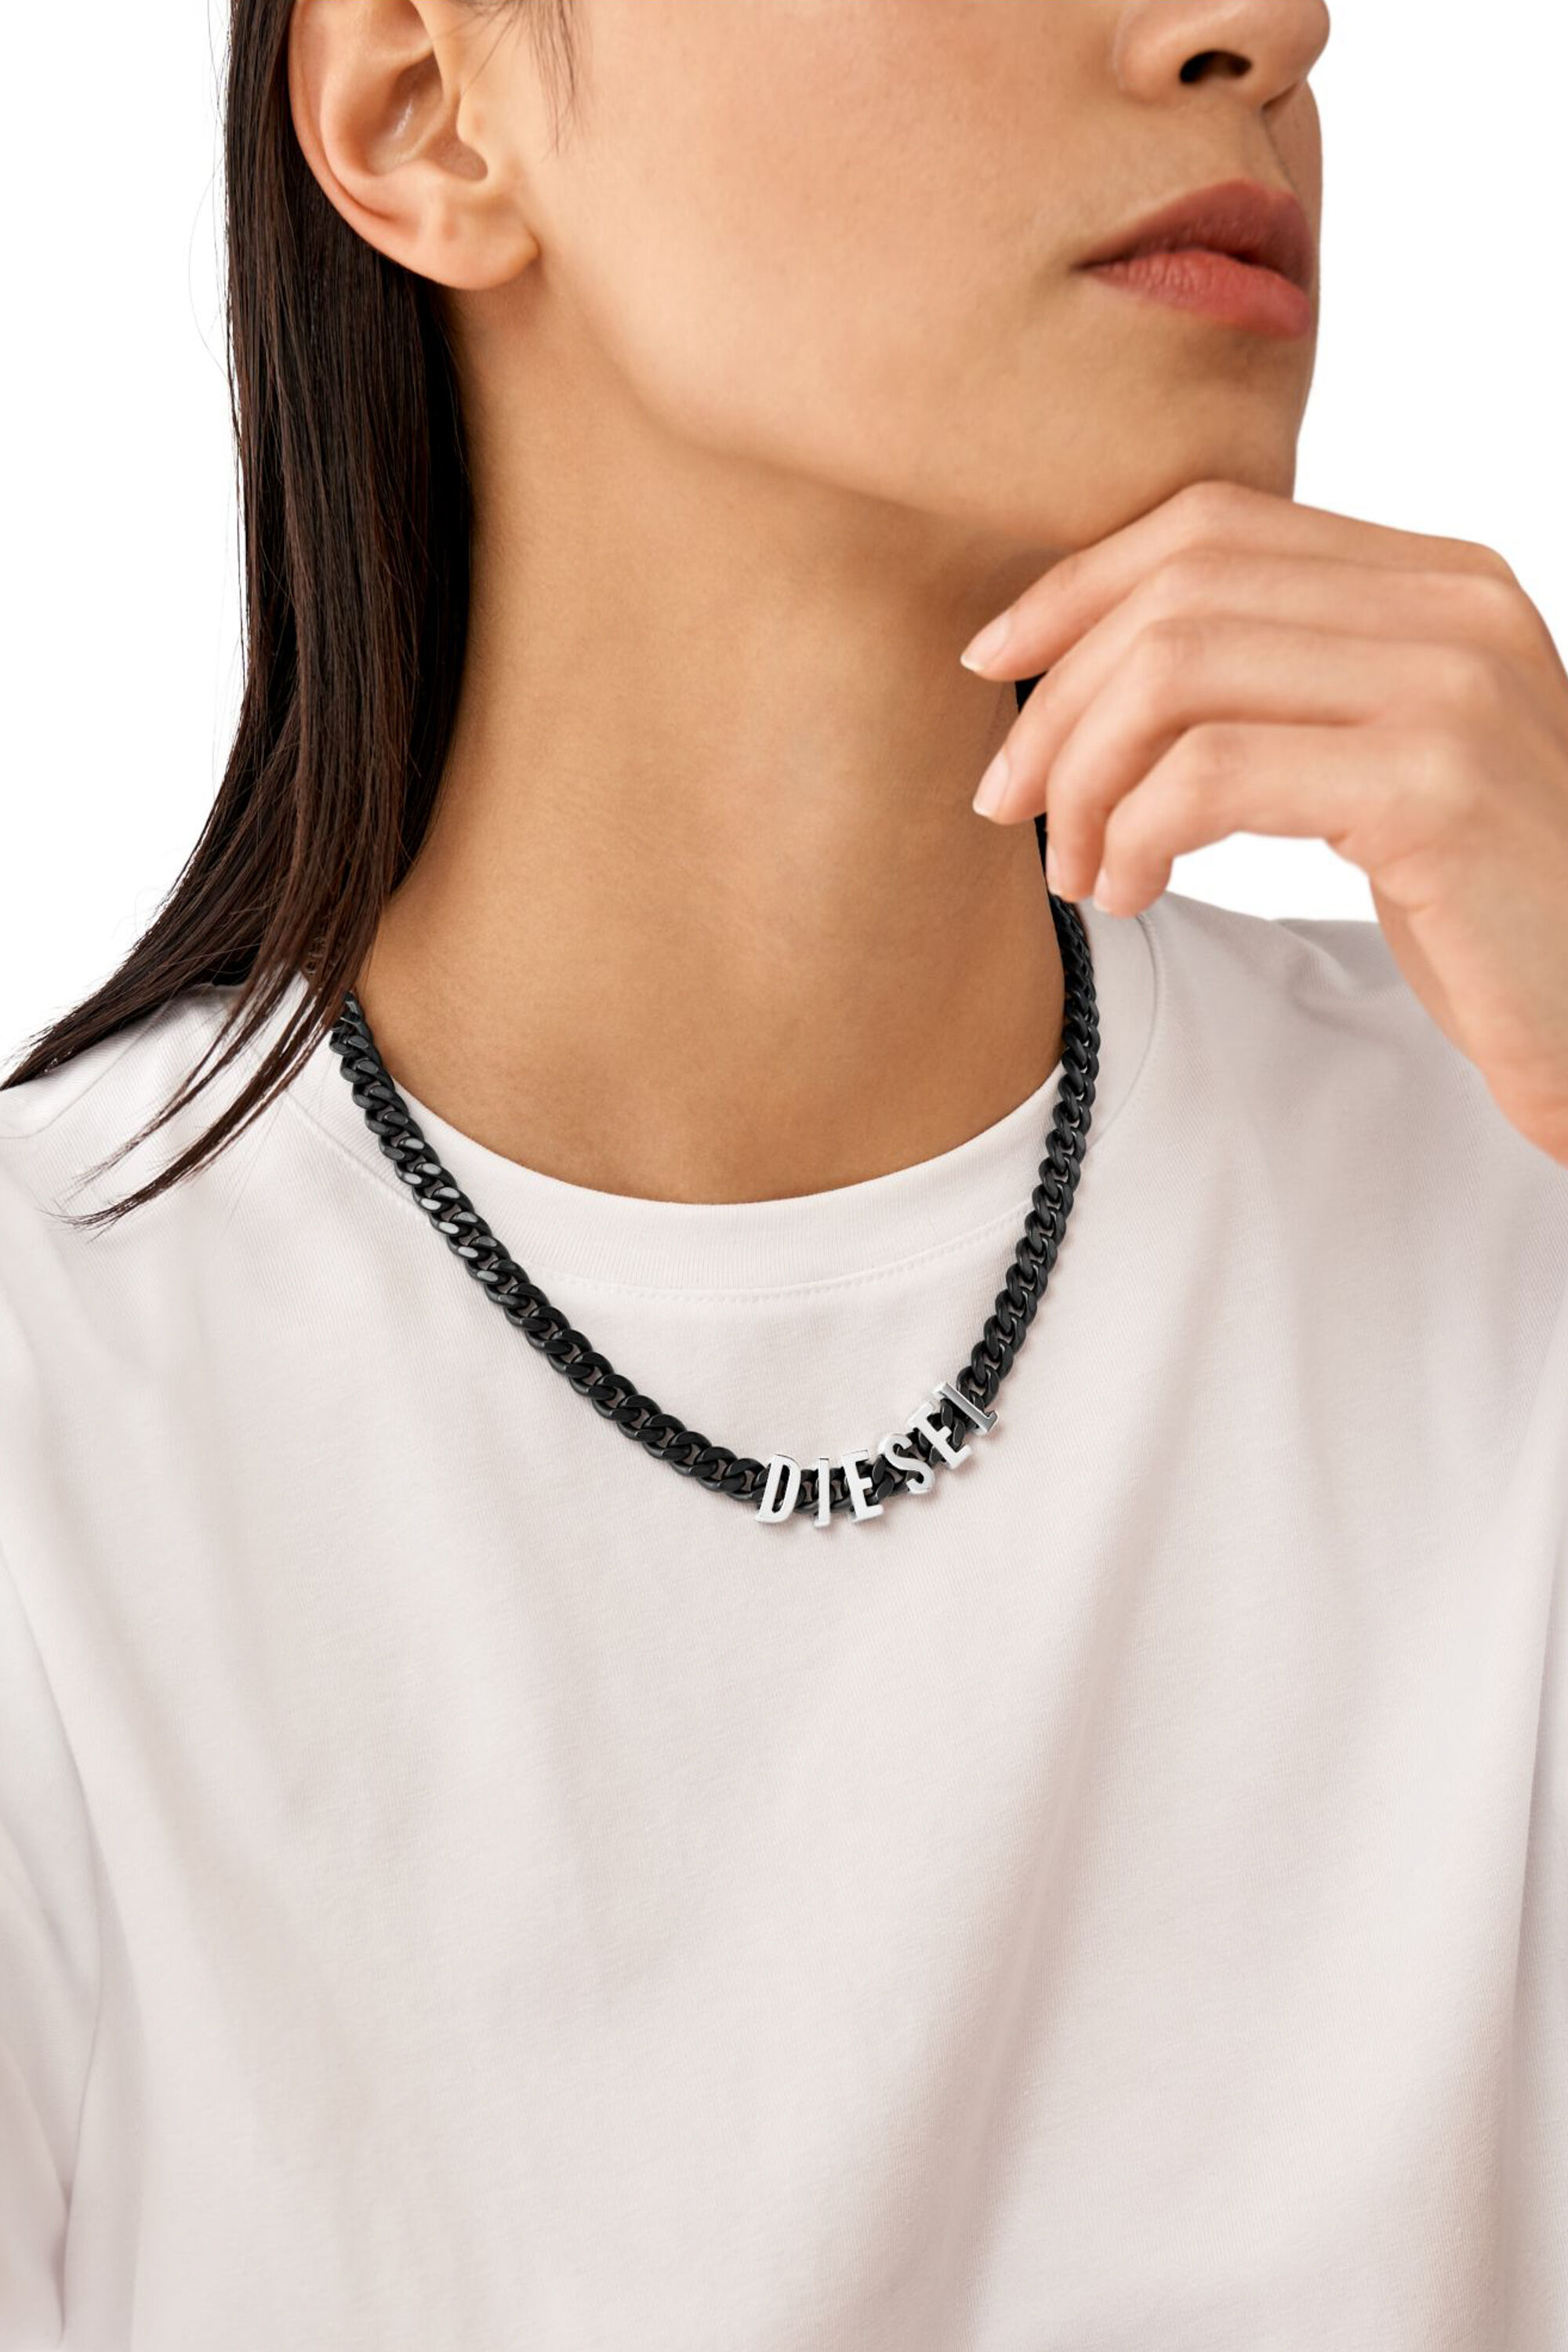 DX1487 Two-Tone stainless steel chain necklace｜ブラック｜メンズ 